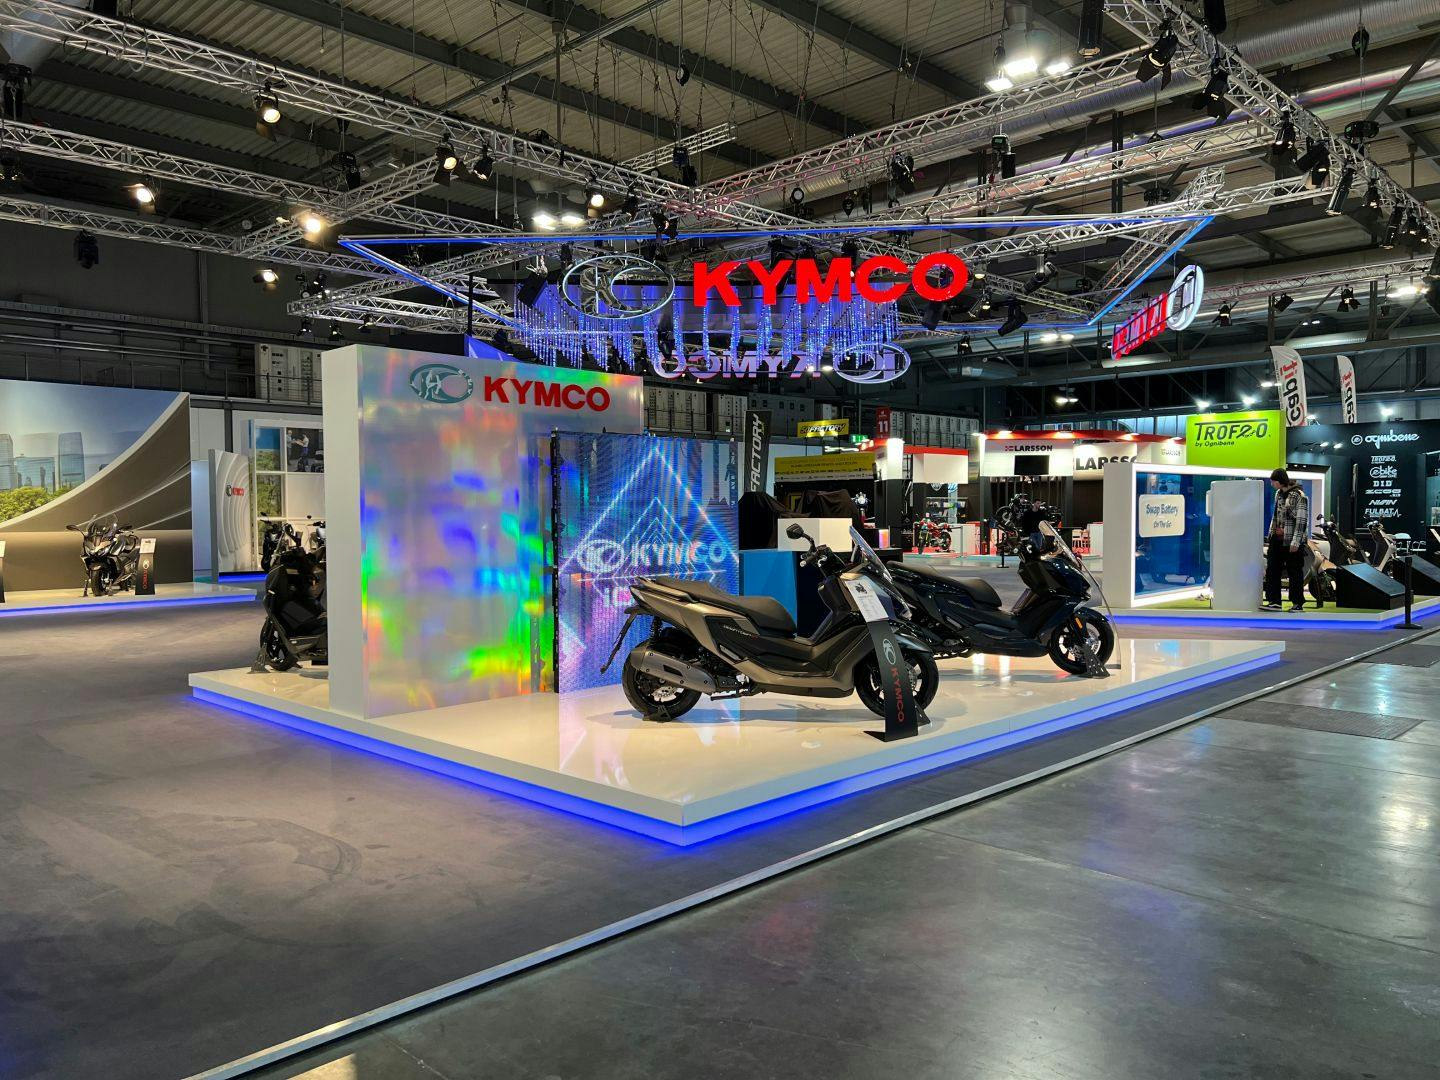 Kymco exhibition booth for the EICMA expo in Milan 2023.